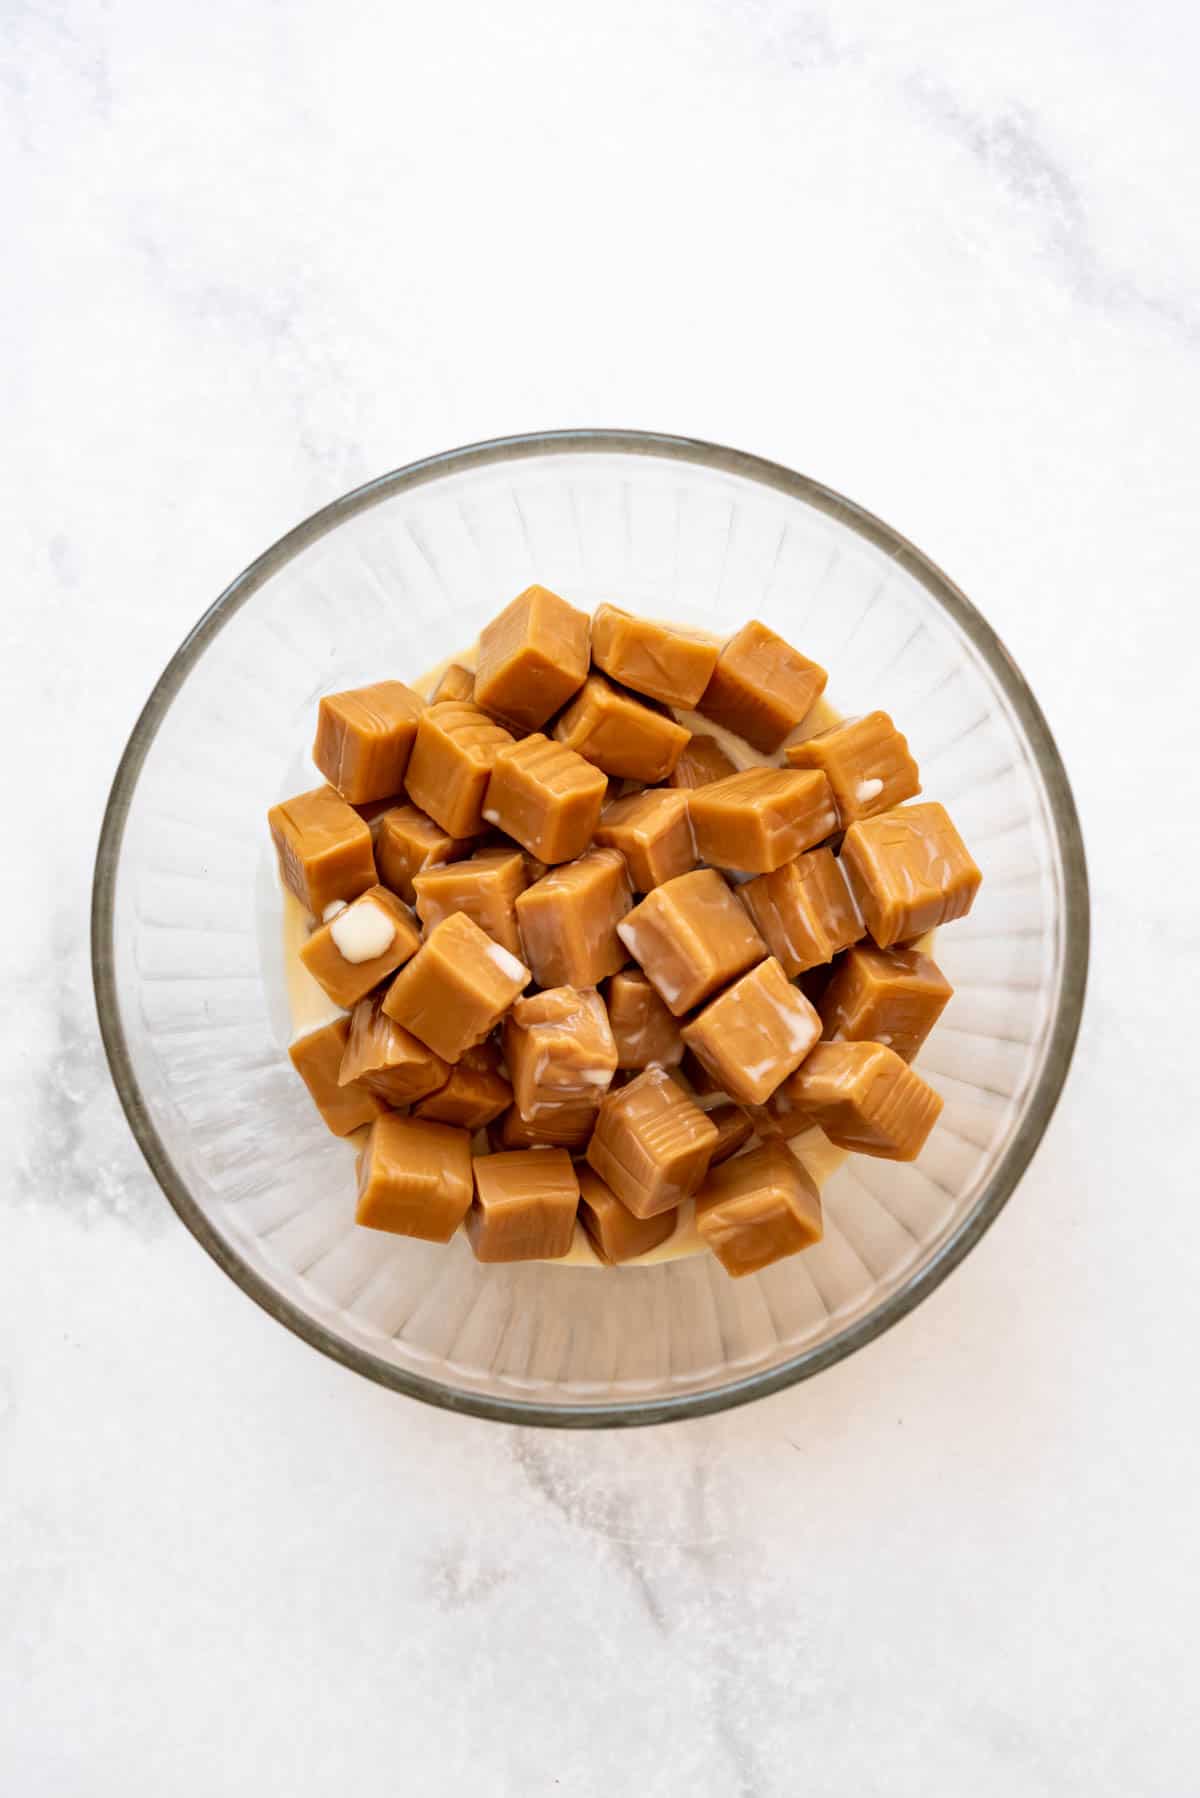 Caramels and evaporated milk in a glass bowl.